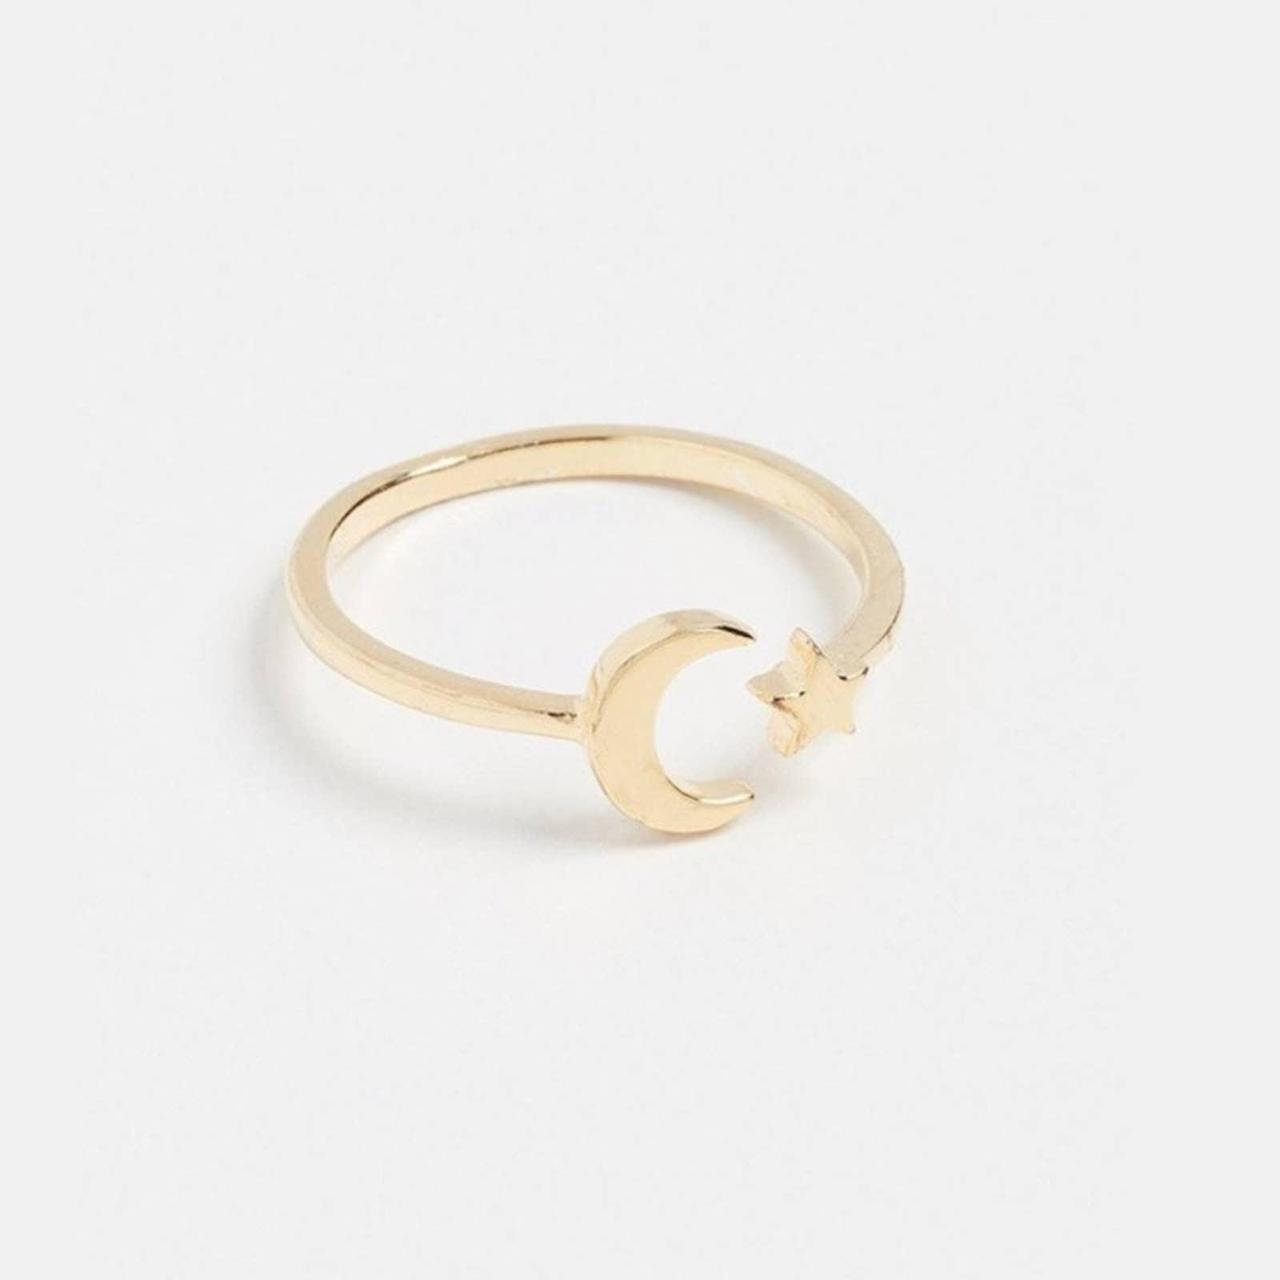 Product Image 1 - Adjustable ring but it is